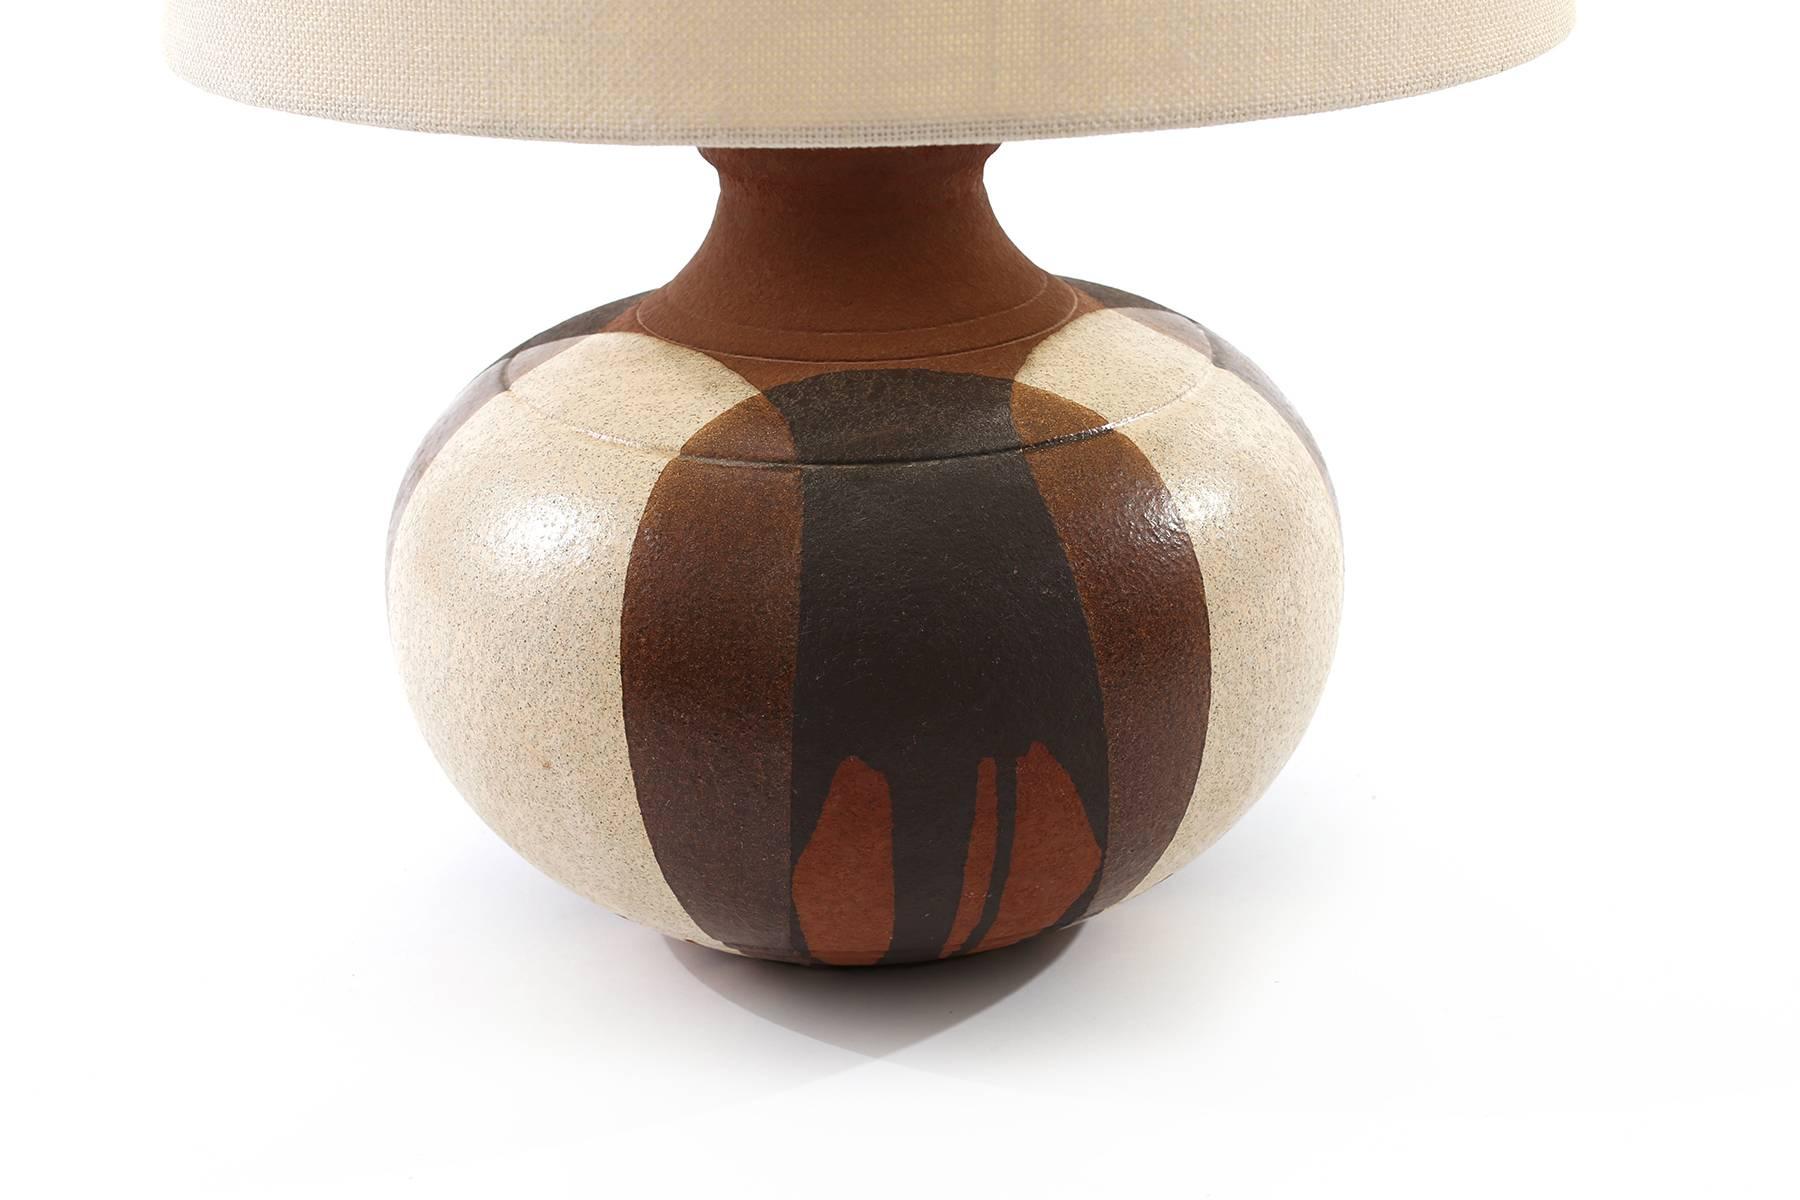 Large-scale ceramic lamp by David Cressey, circa early 1960s. This example has glaze hues of white's blacks and earth tones and has been newly wired. Price listed is for the lamp without the shade. Shades can be procured. Please inquire. Height with